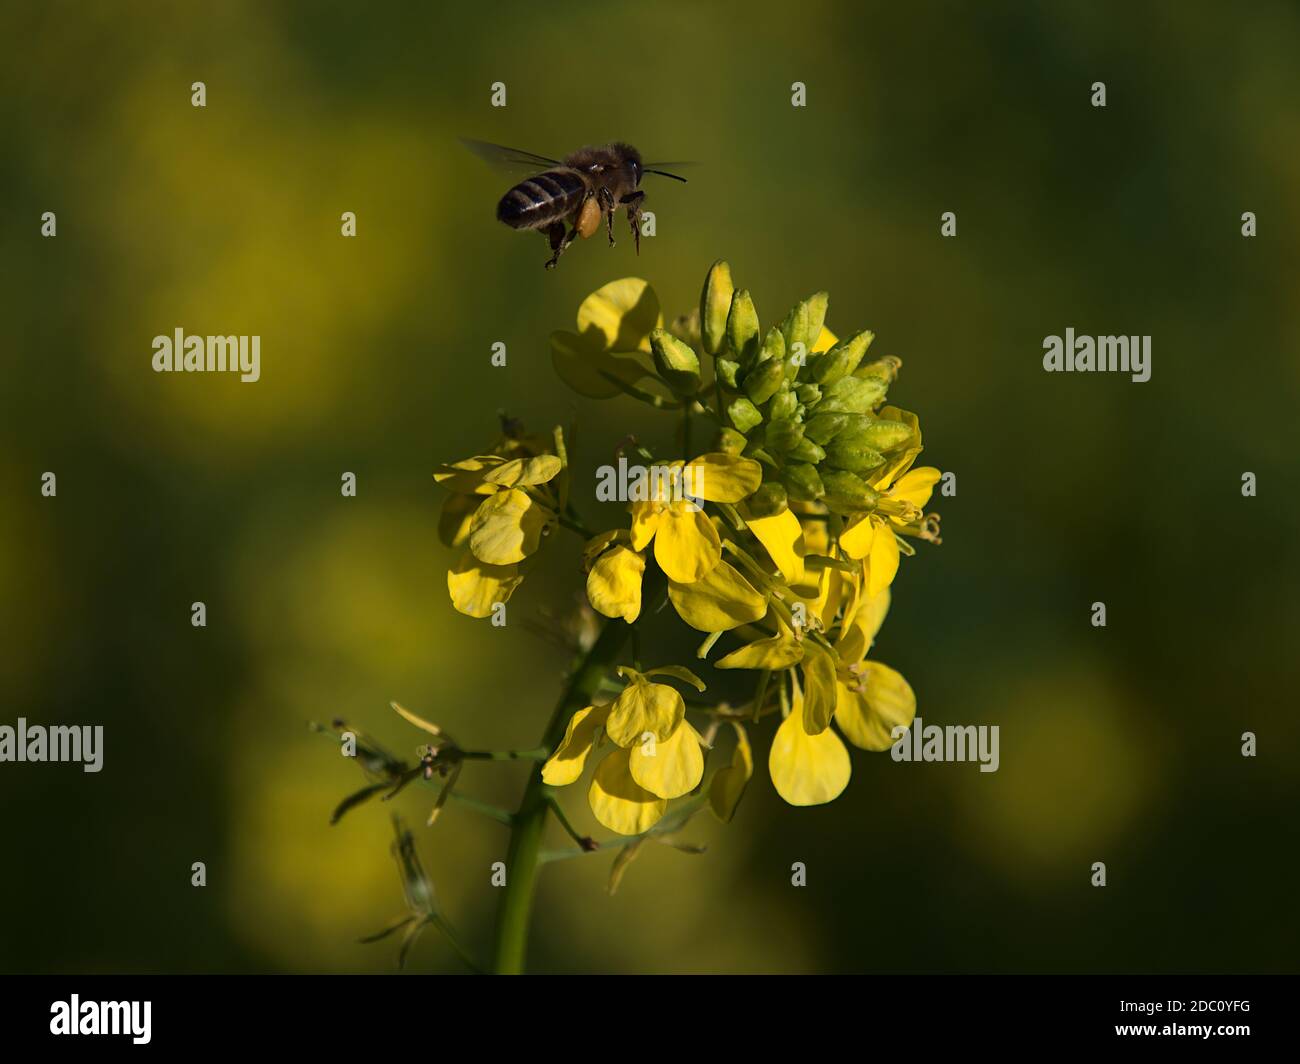 Macro photography of flying wild bee on search for nectar approaching flower head of rapeseed plant with yellow colored blossom on agricultural field. Stock Photo